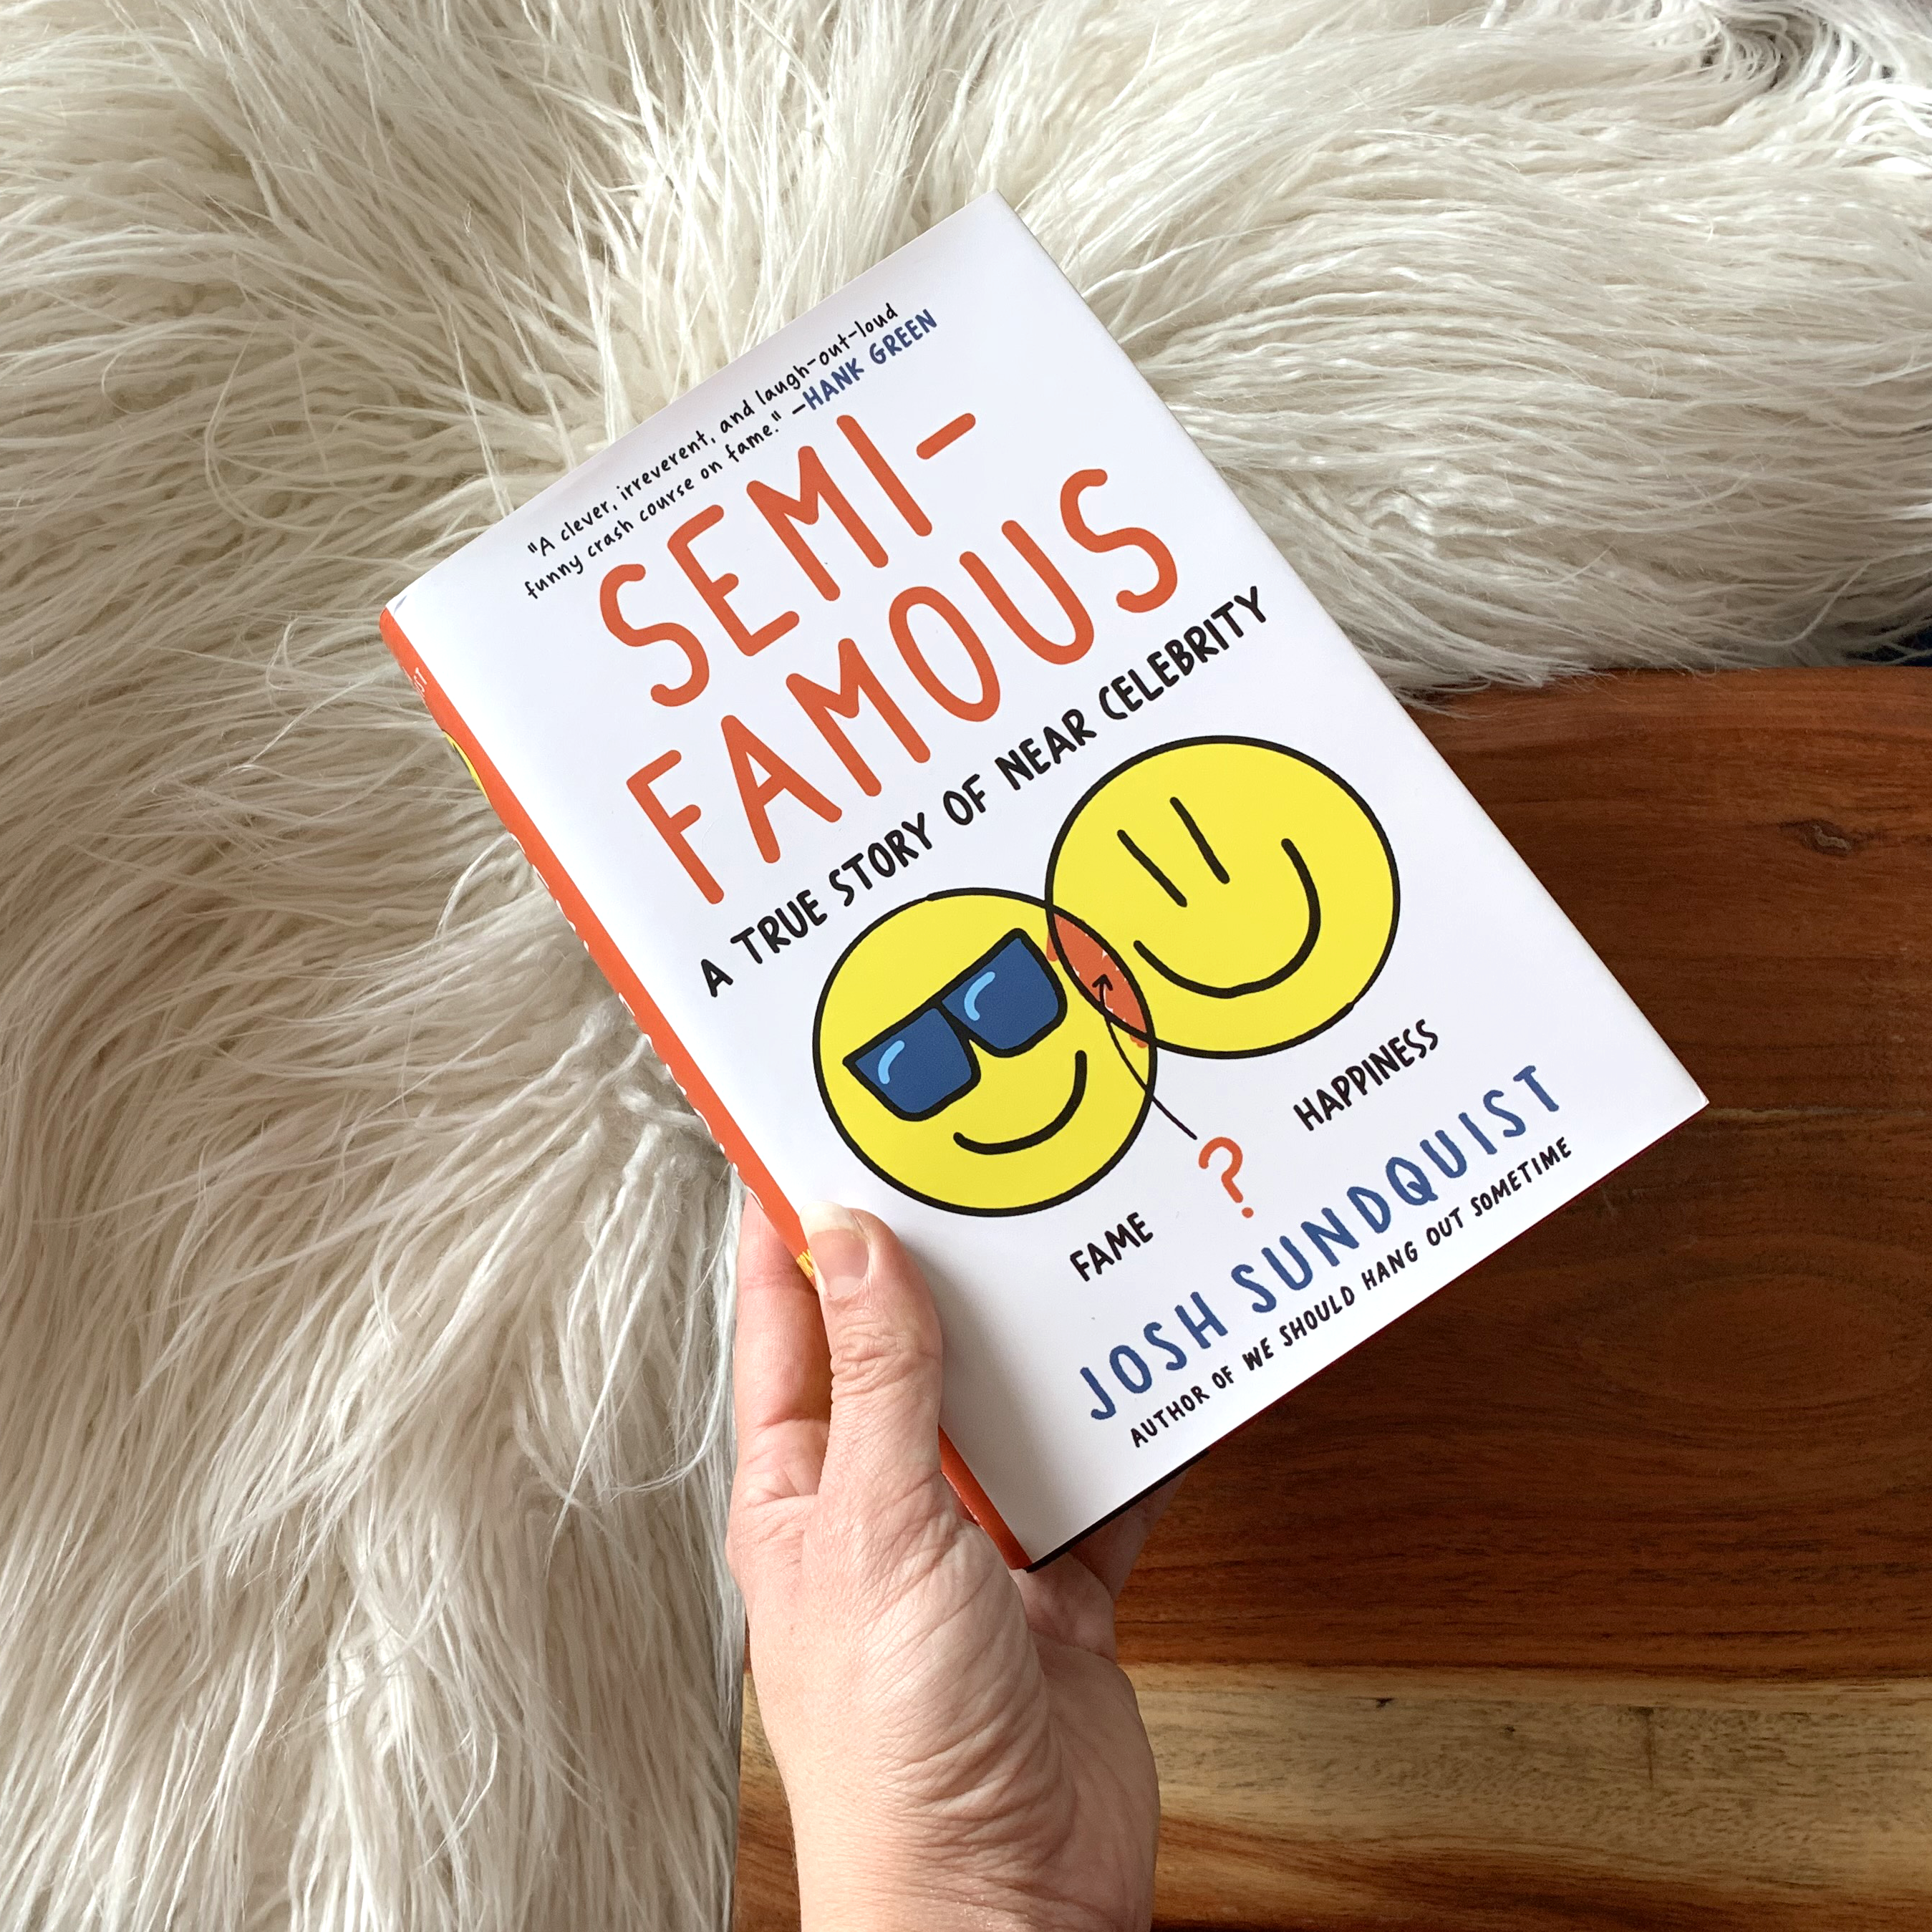 Image of the book "Semi-Famous" by Josh Sundquist